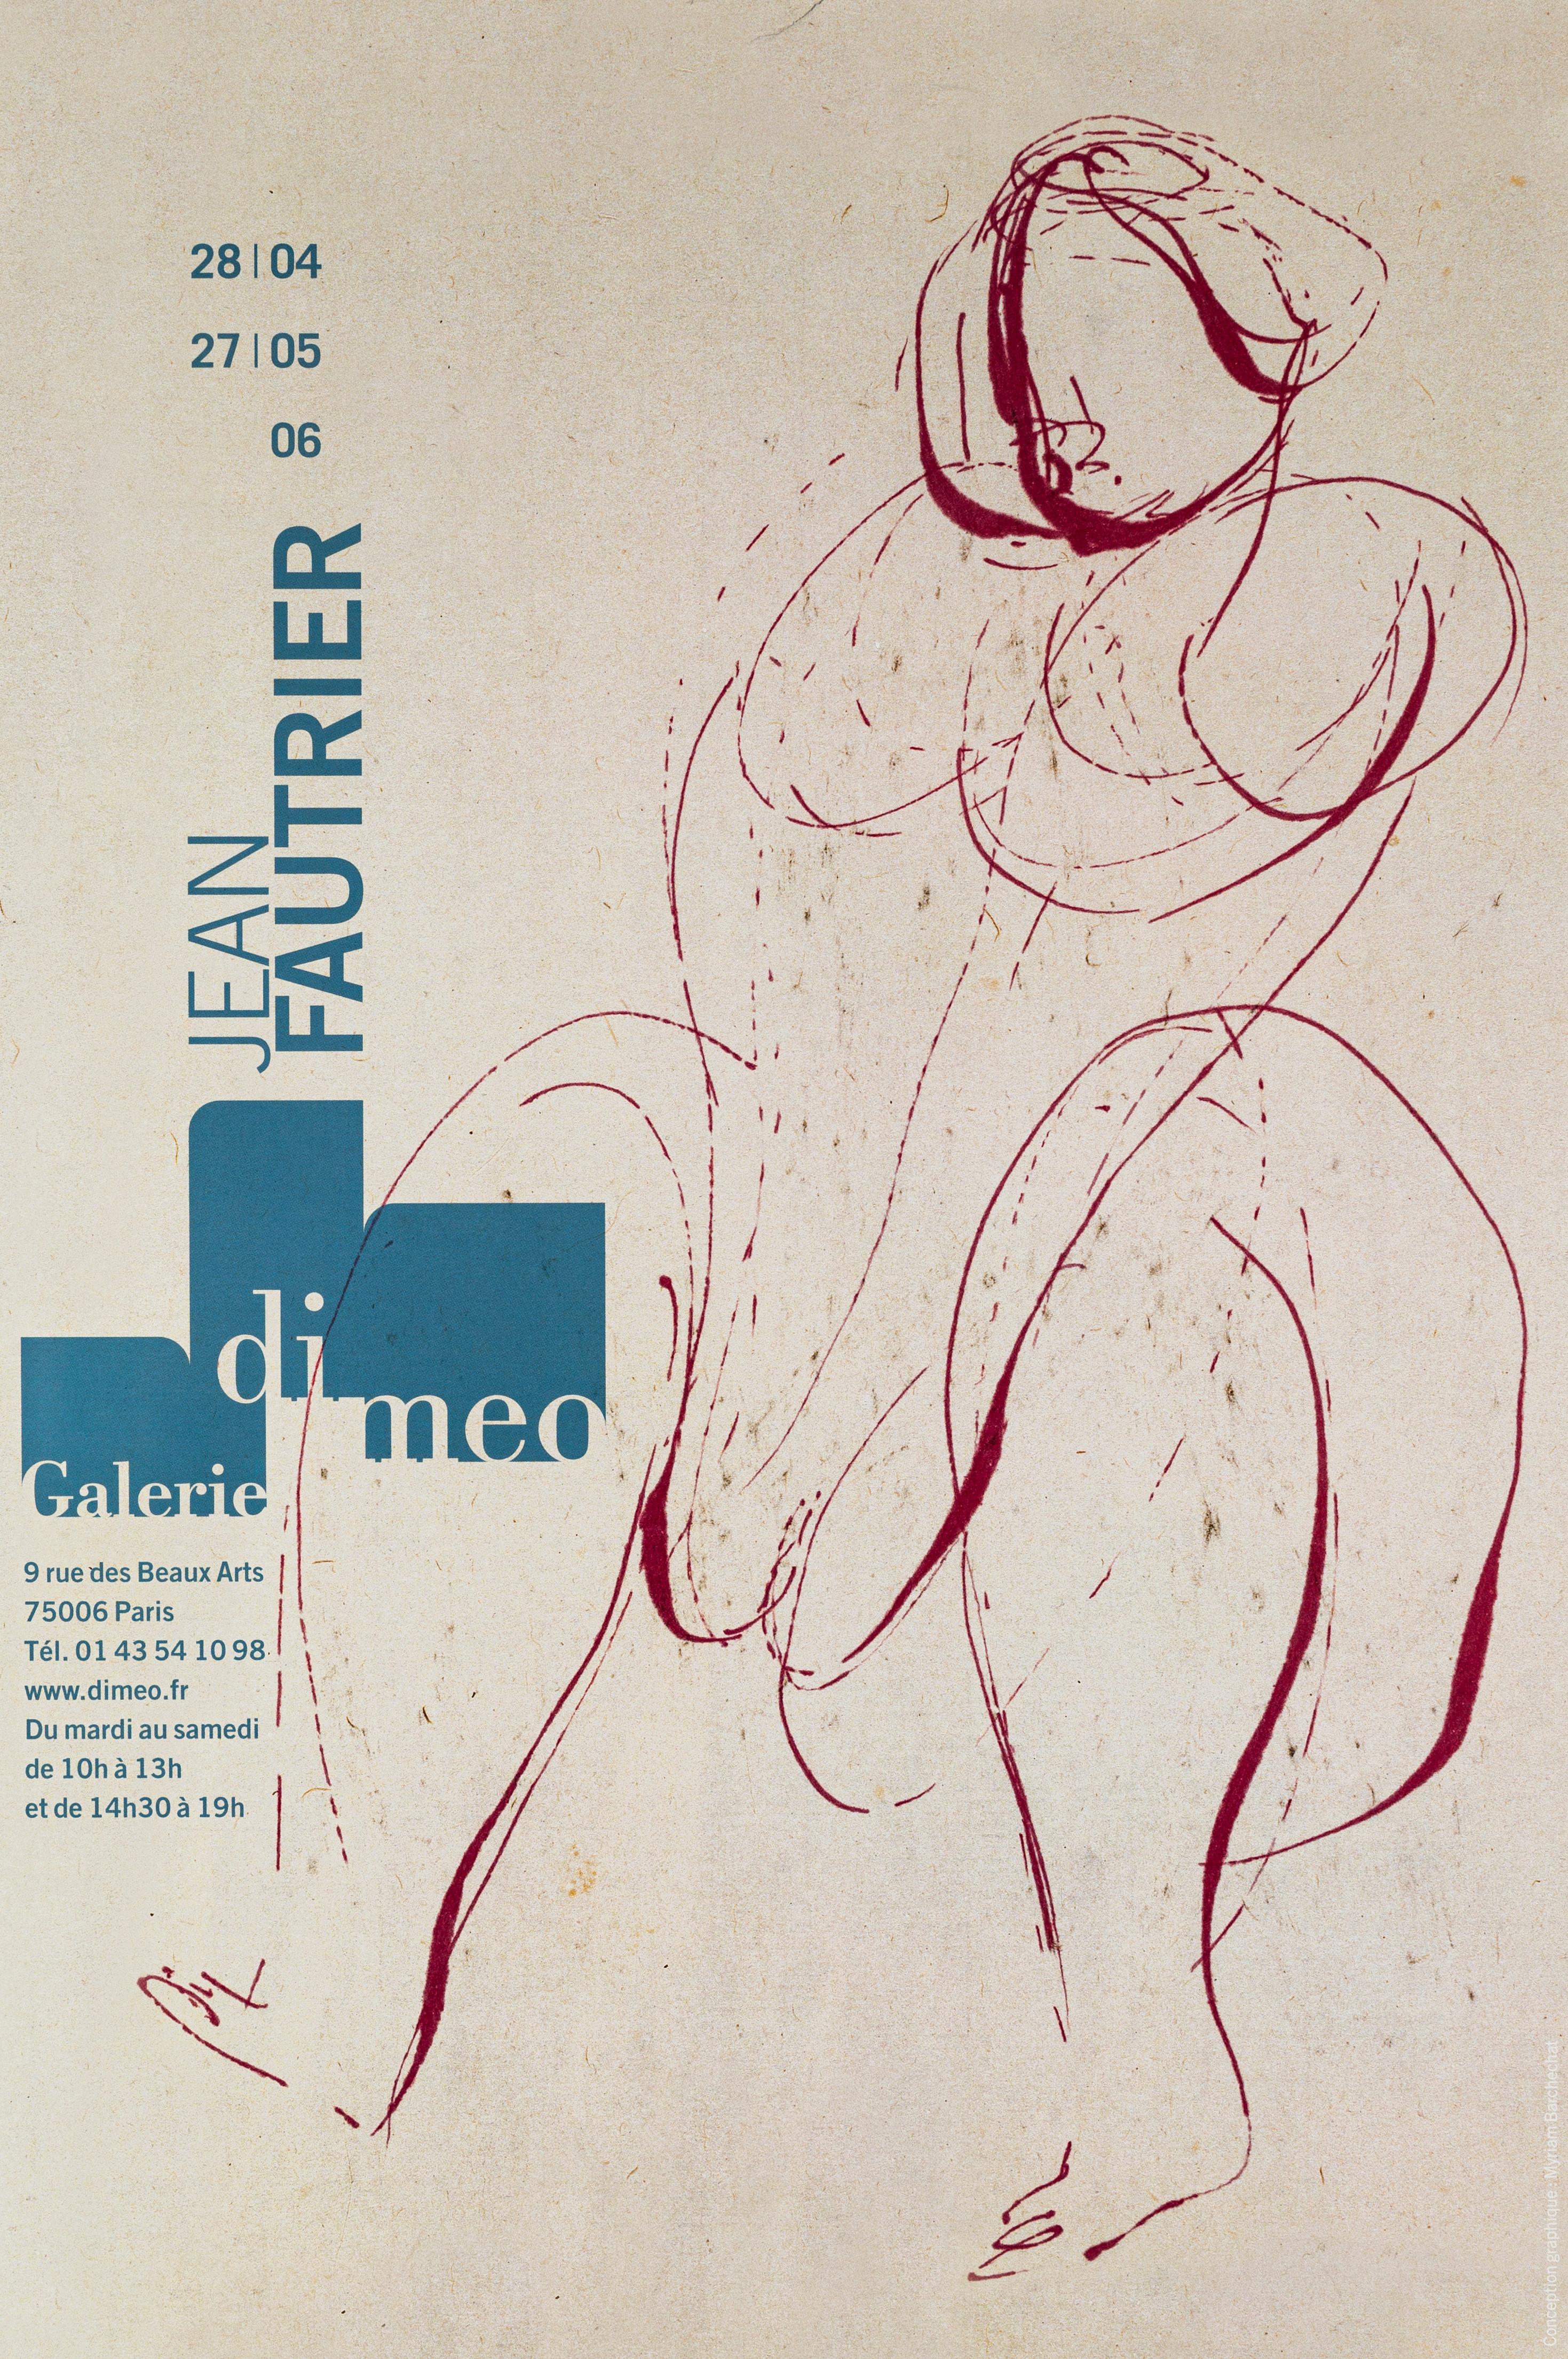 Jean Fautrier - Galerie Di Meo is a vintage poster.

This artwork was realized in occasion of the exhibition by Jean Fautrier held at Galerie Di Meo in Paris in 2006.

This vintage poster represents one of the many artworks that realized Jean